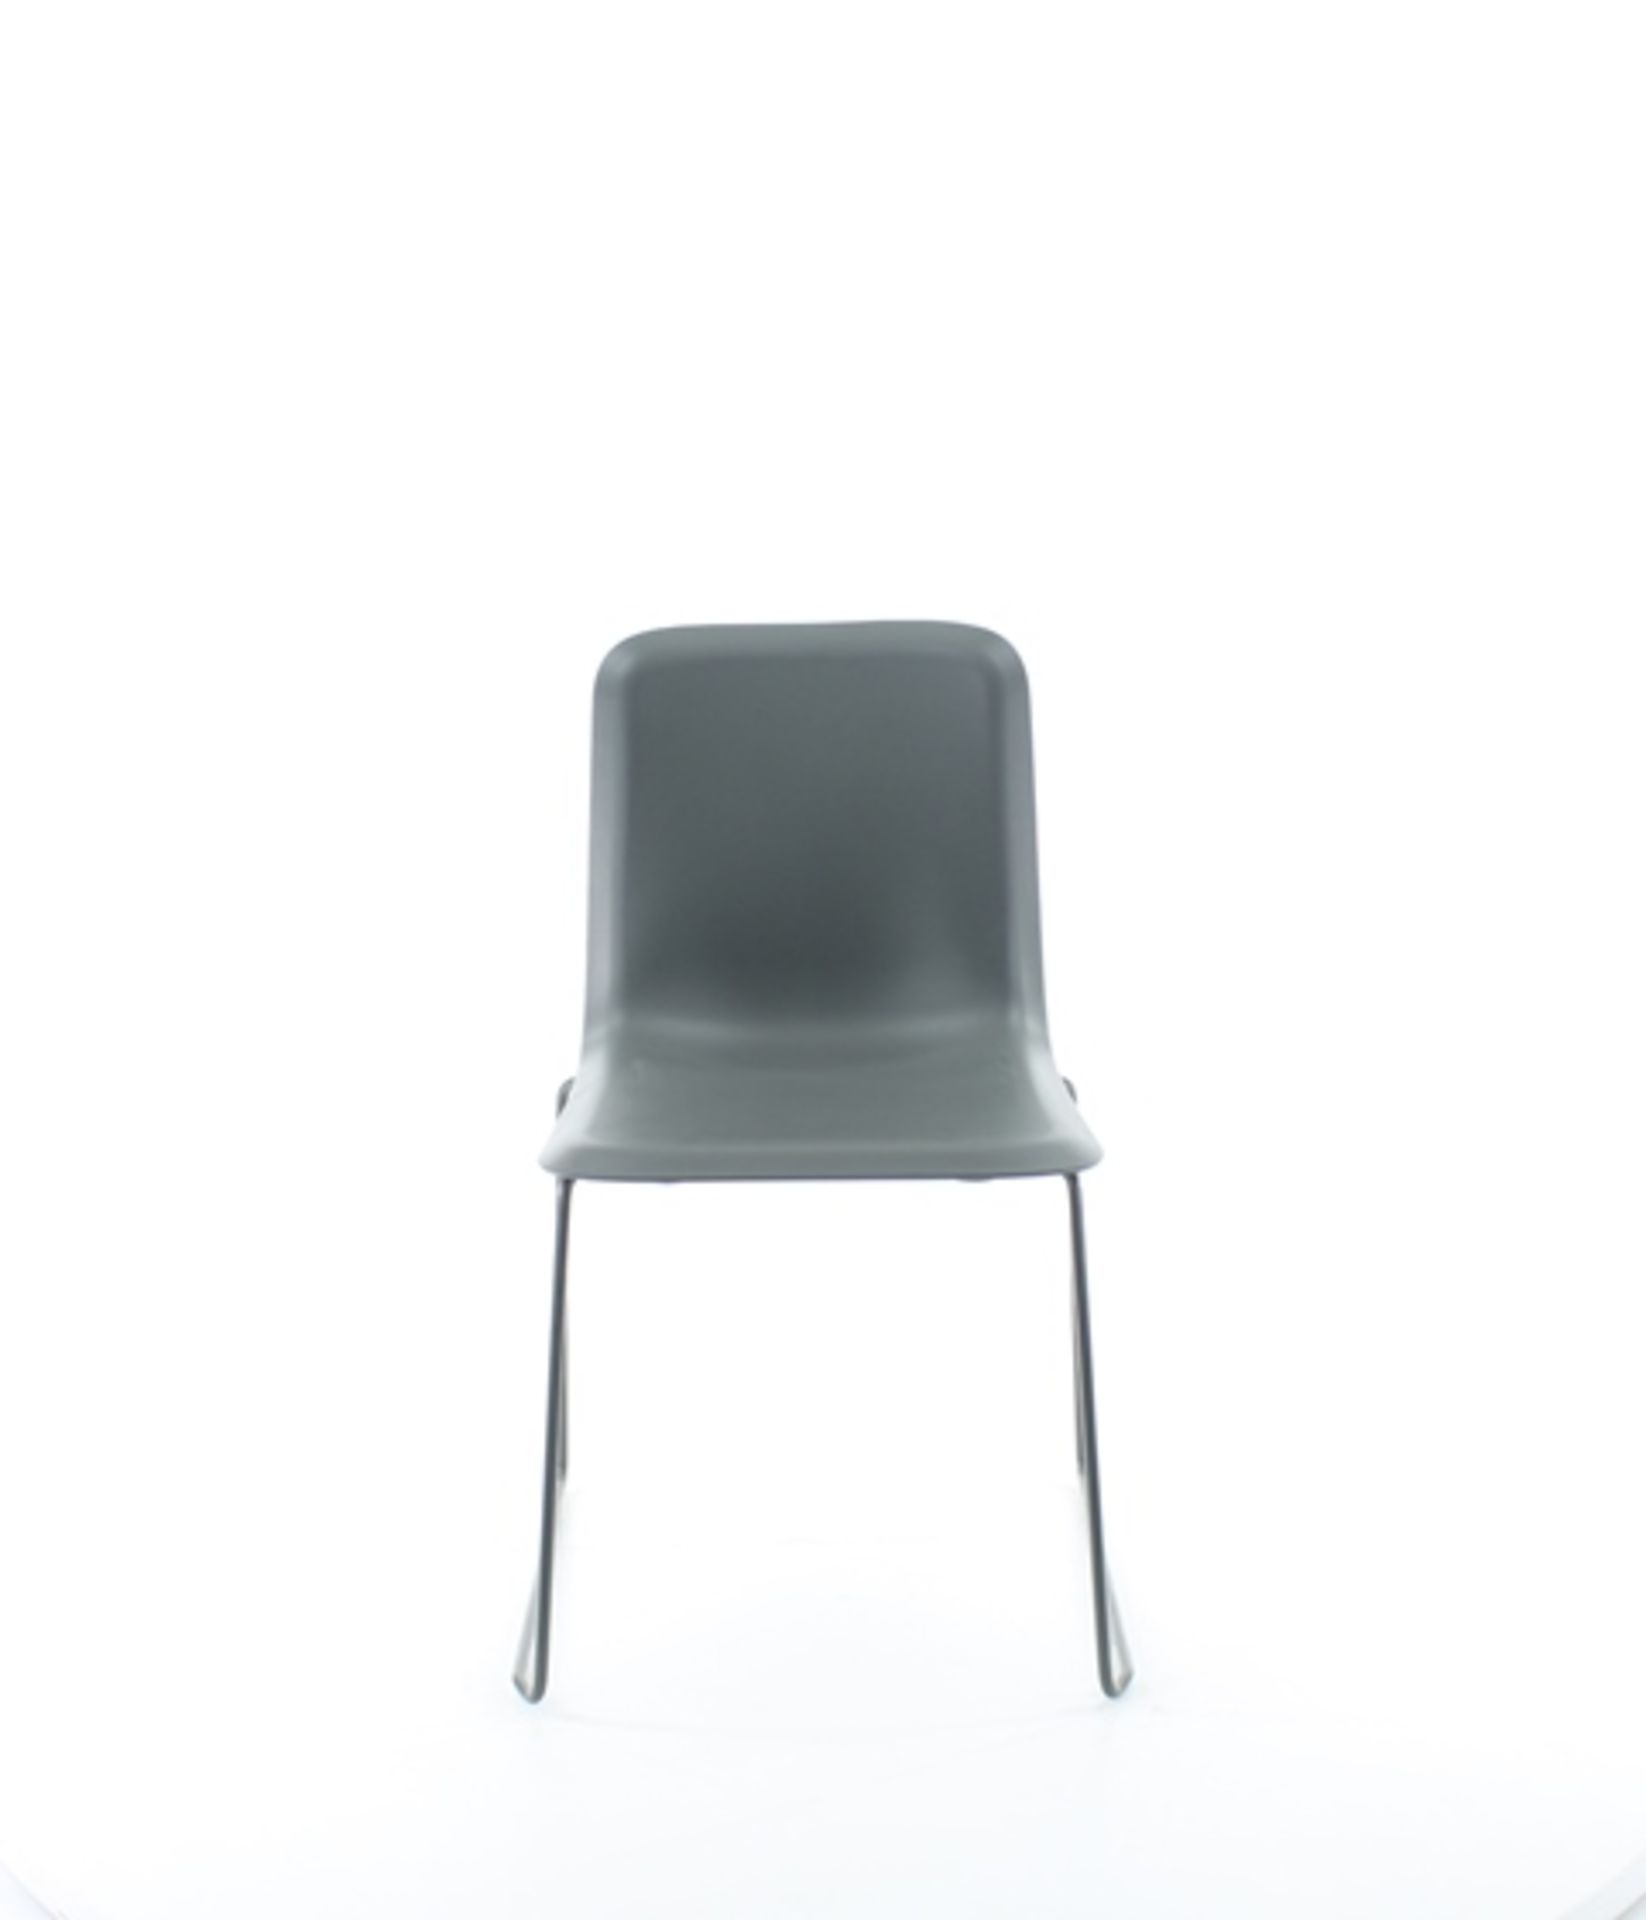 Unused wire frame conference chair in grey (RRP £95 each) located in Stafford, viewing by